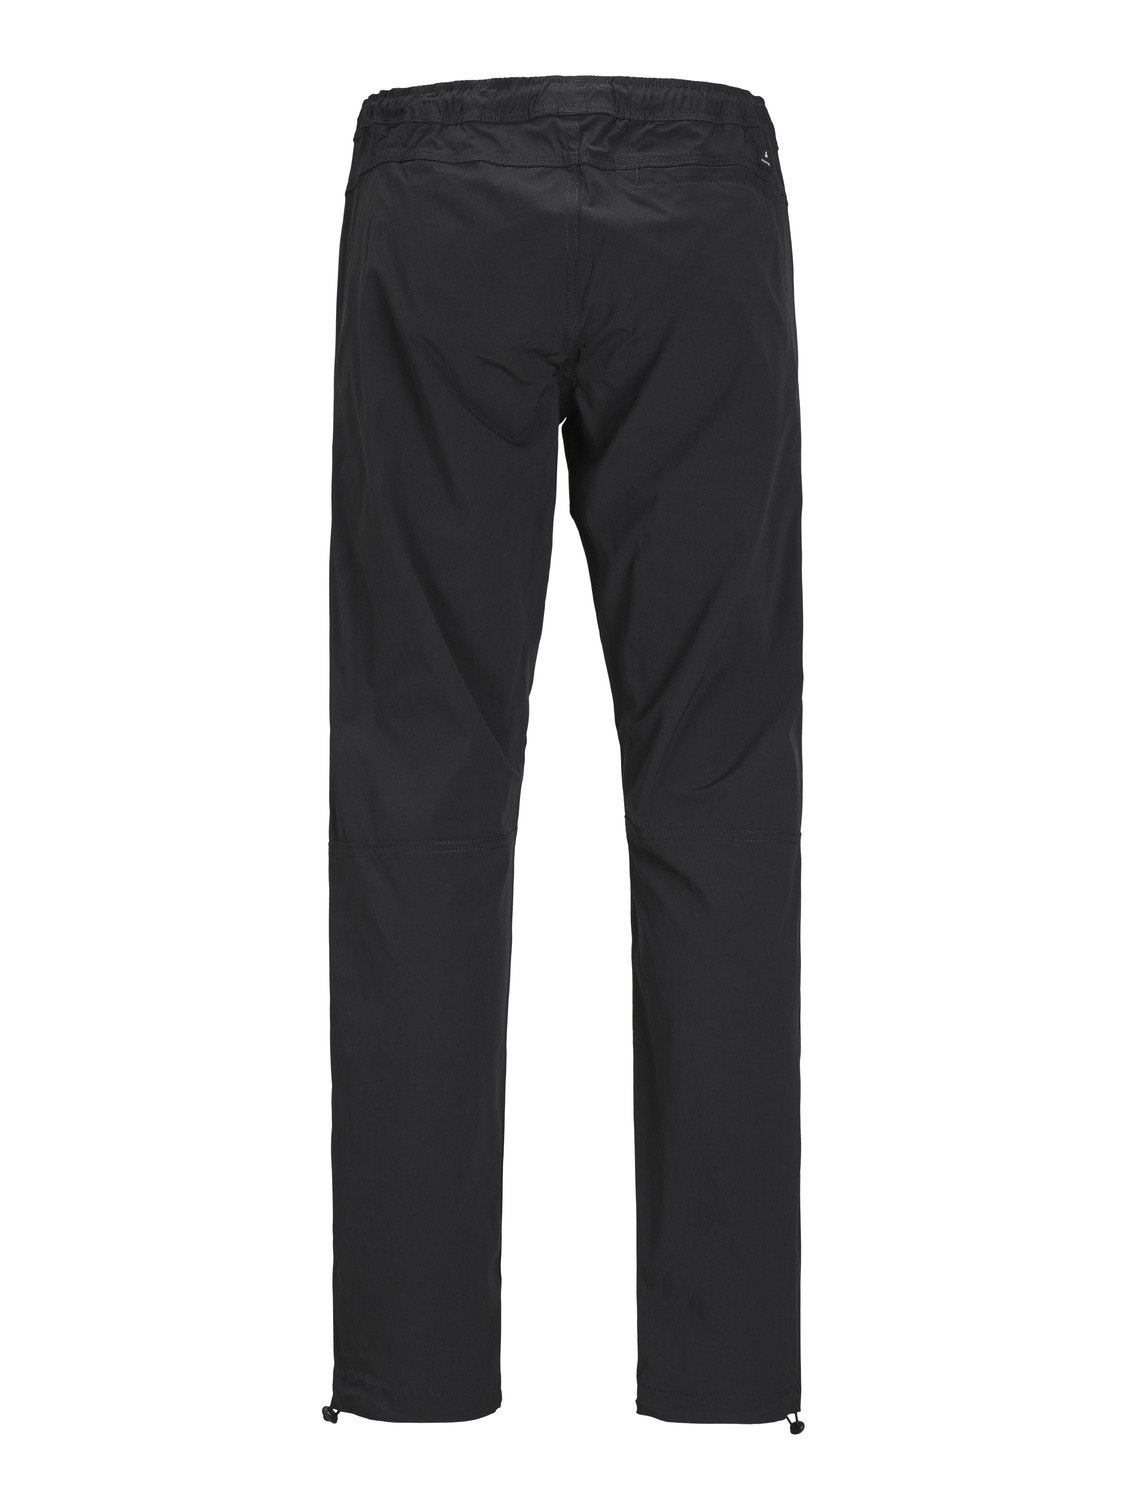 Jack & Jones Relaxed Fit Cargo trousers -Black - 12248997